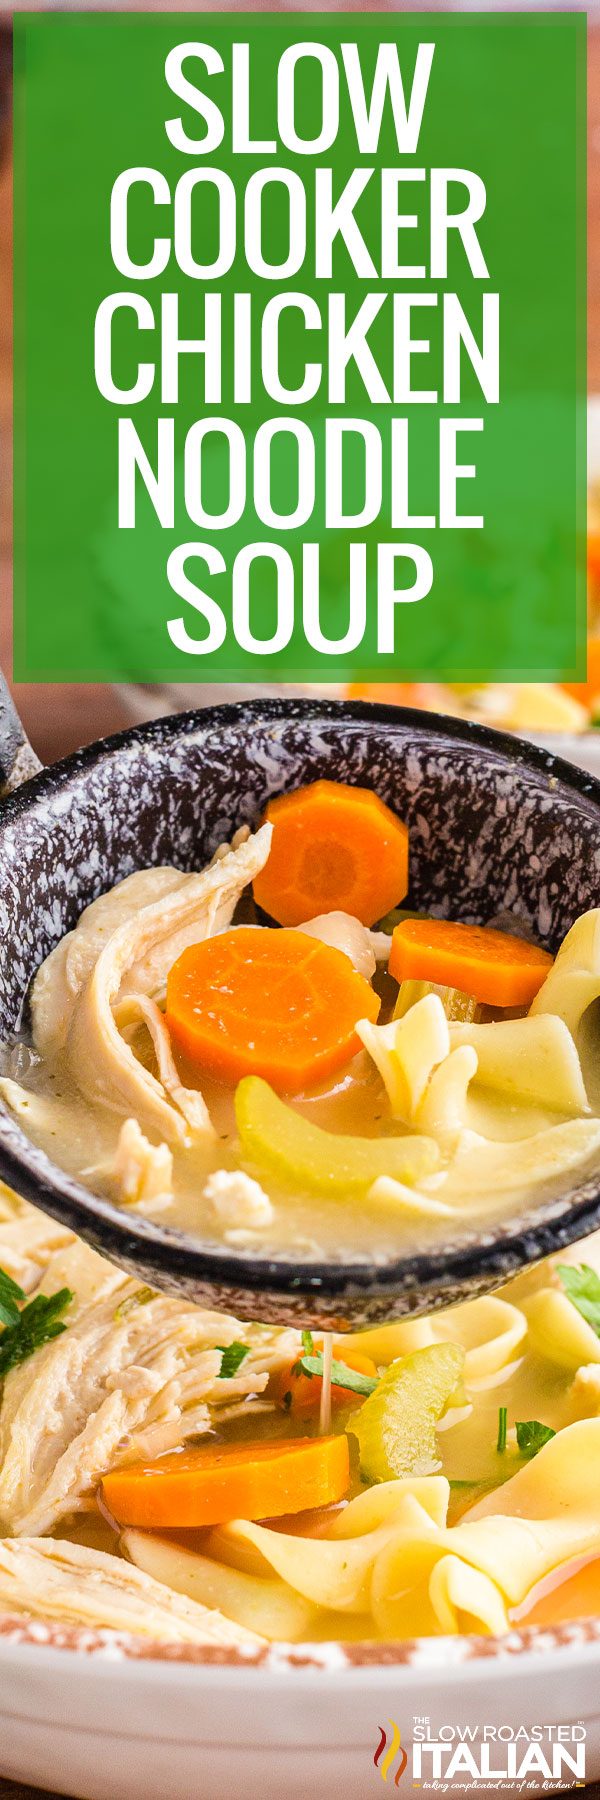 titled pinterest collage for slow cooker chicken noodle soup recipe